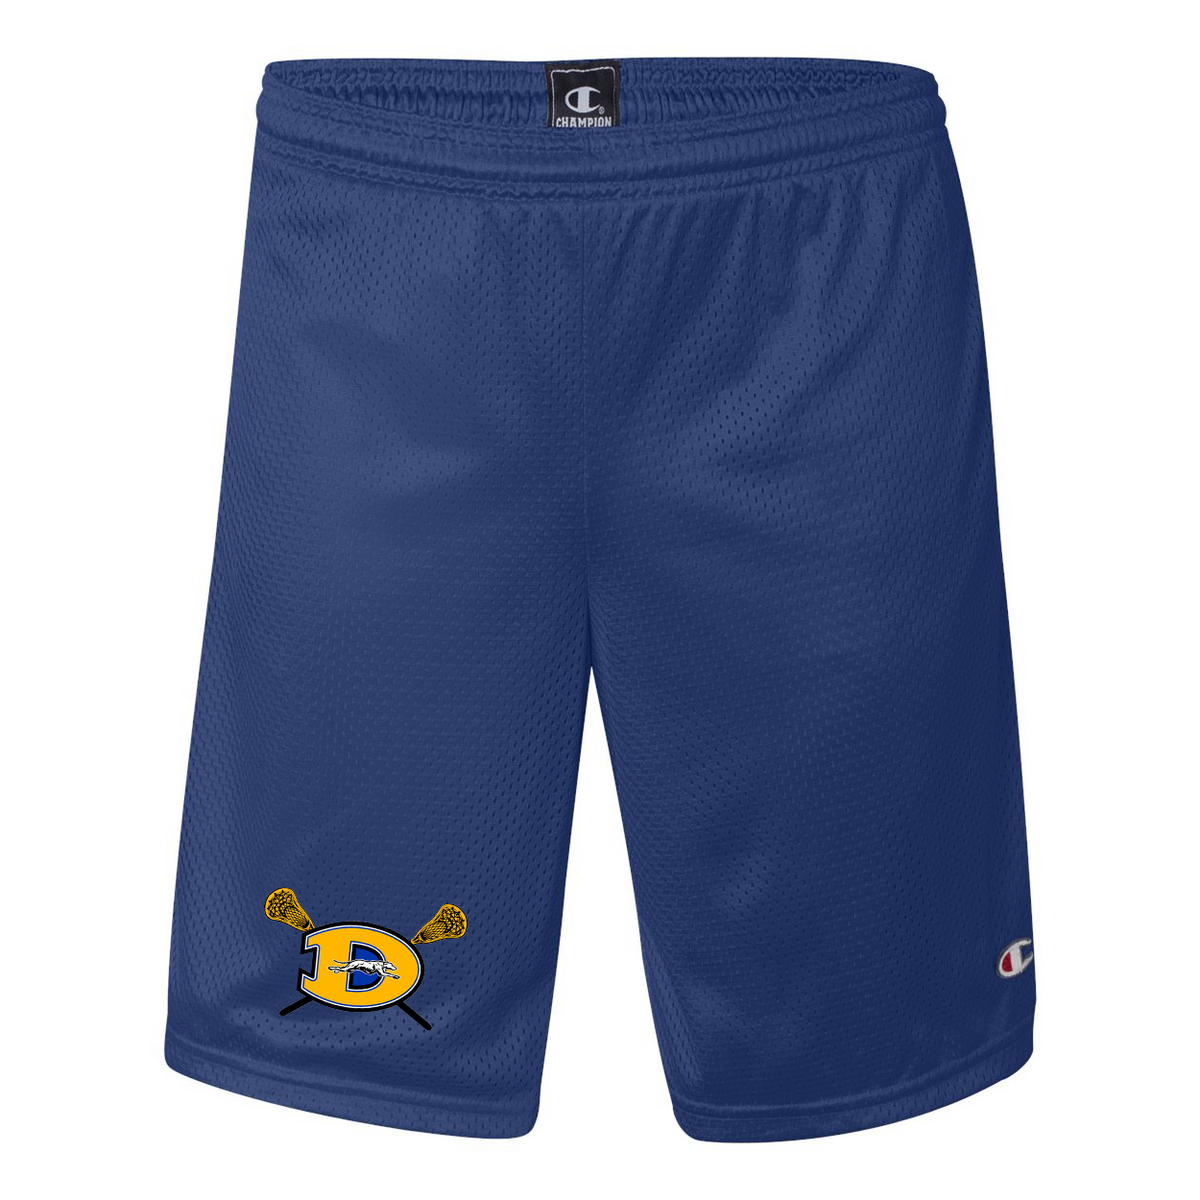 Downingtown West Lacrosse Champion Mesh Shorts with Pockets